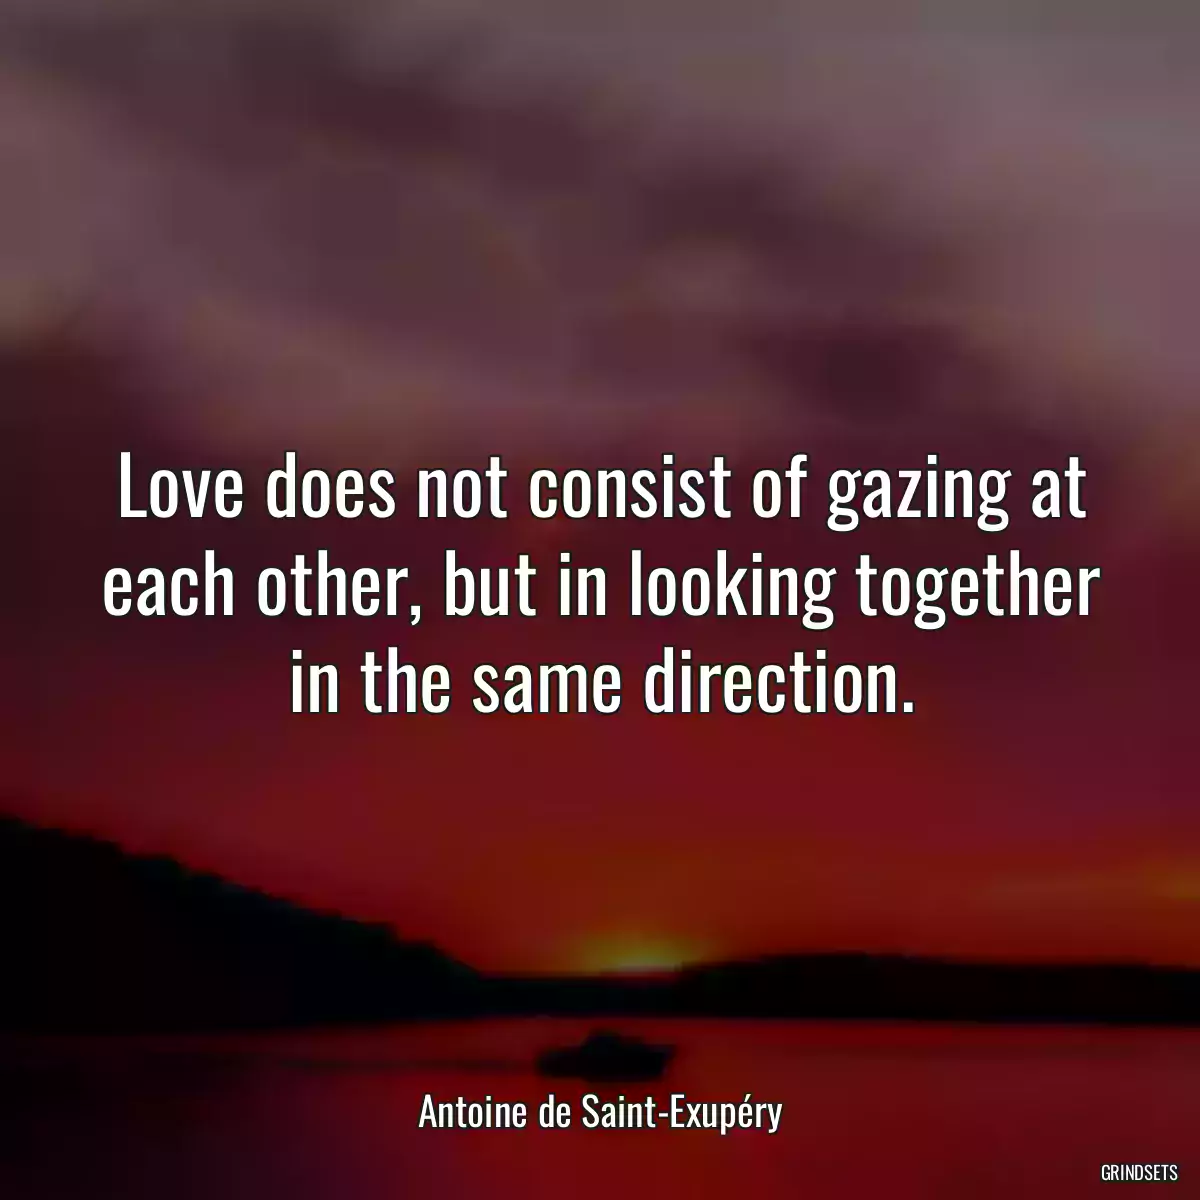 Love does not consist of gazing at each other, but in looking together in the same direction.